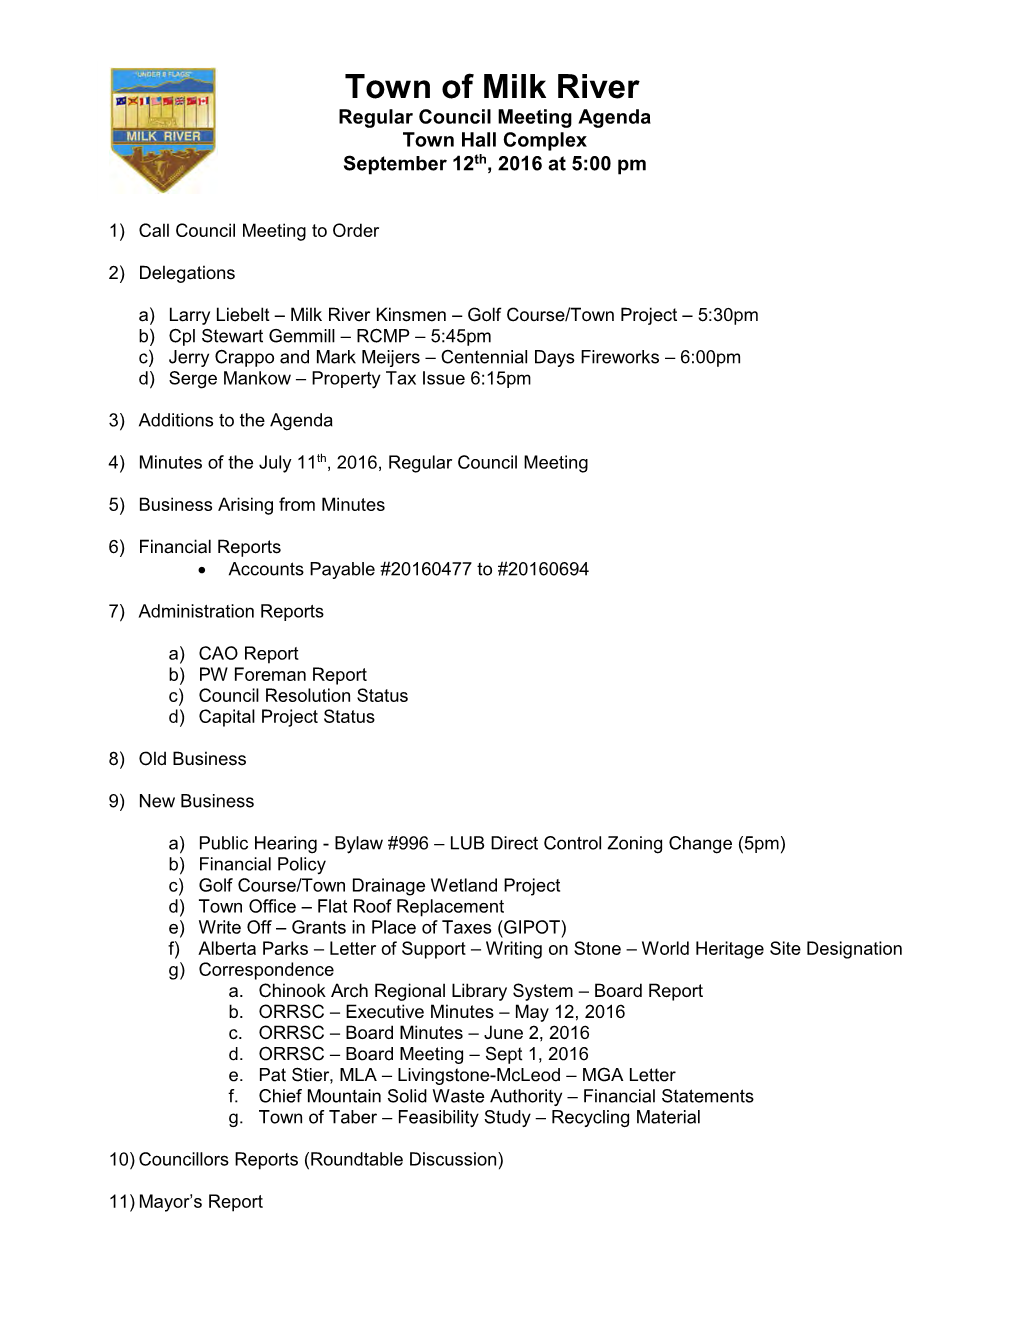 Town of Milk River Regular Council Meeting Agenda Town Hall Complex September 12Th, 201 6 at 5:00 Pm